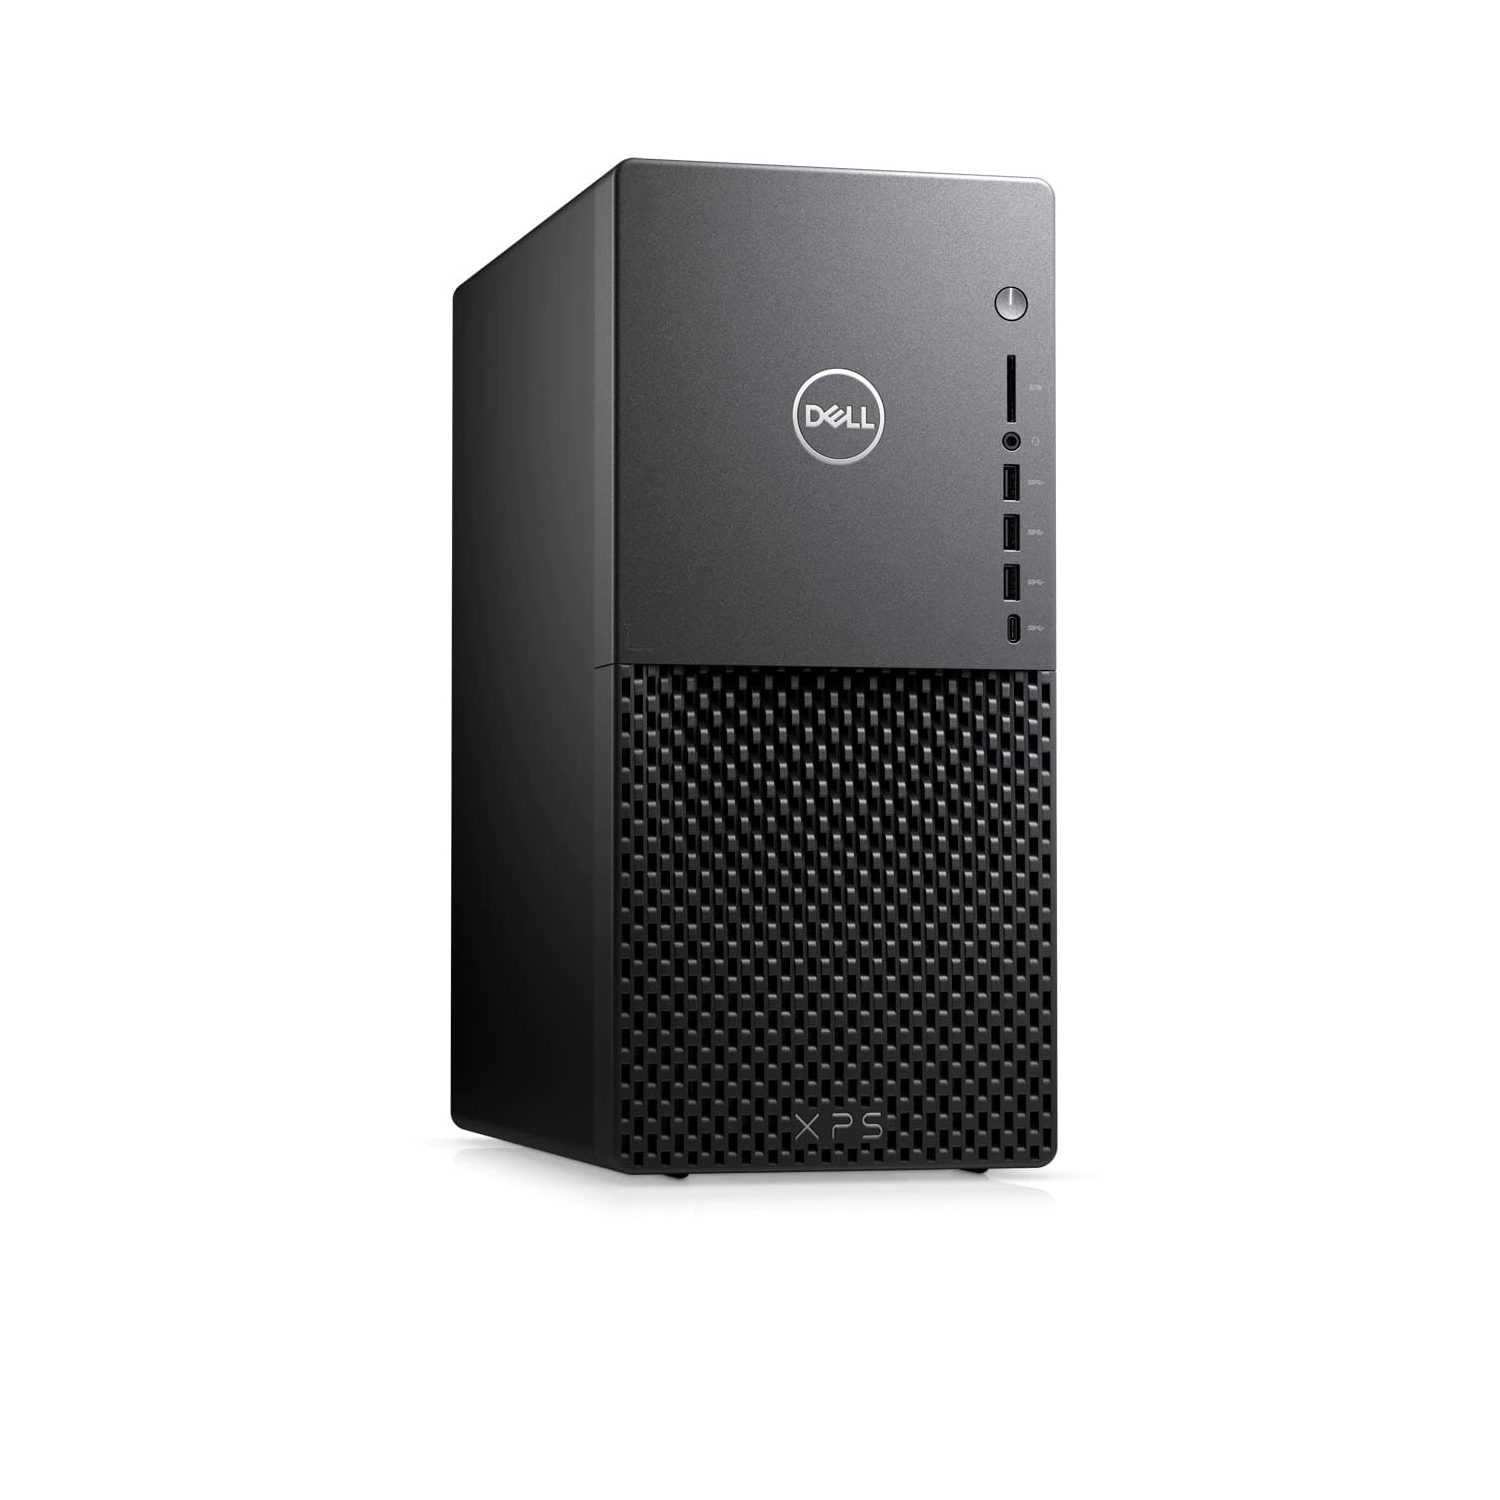 Refurbished (Excellent) - Dell XPS 8940 Desktop (2020) | Core i7 - 1TB HDD + 512GB SSD - 32GB RAM - 2060 SUPER | 8 Cores @ 4.8 GHz - 10th Gen CPU Certified Refurbished